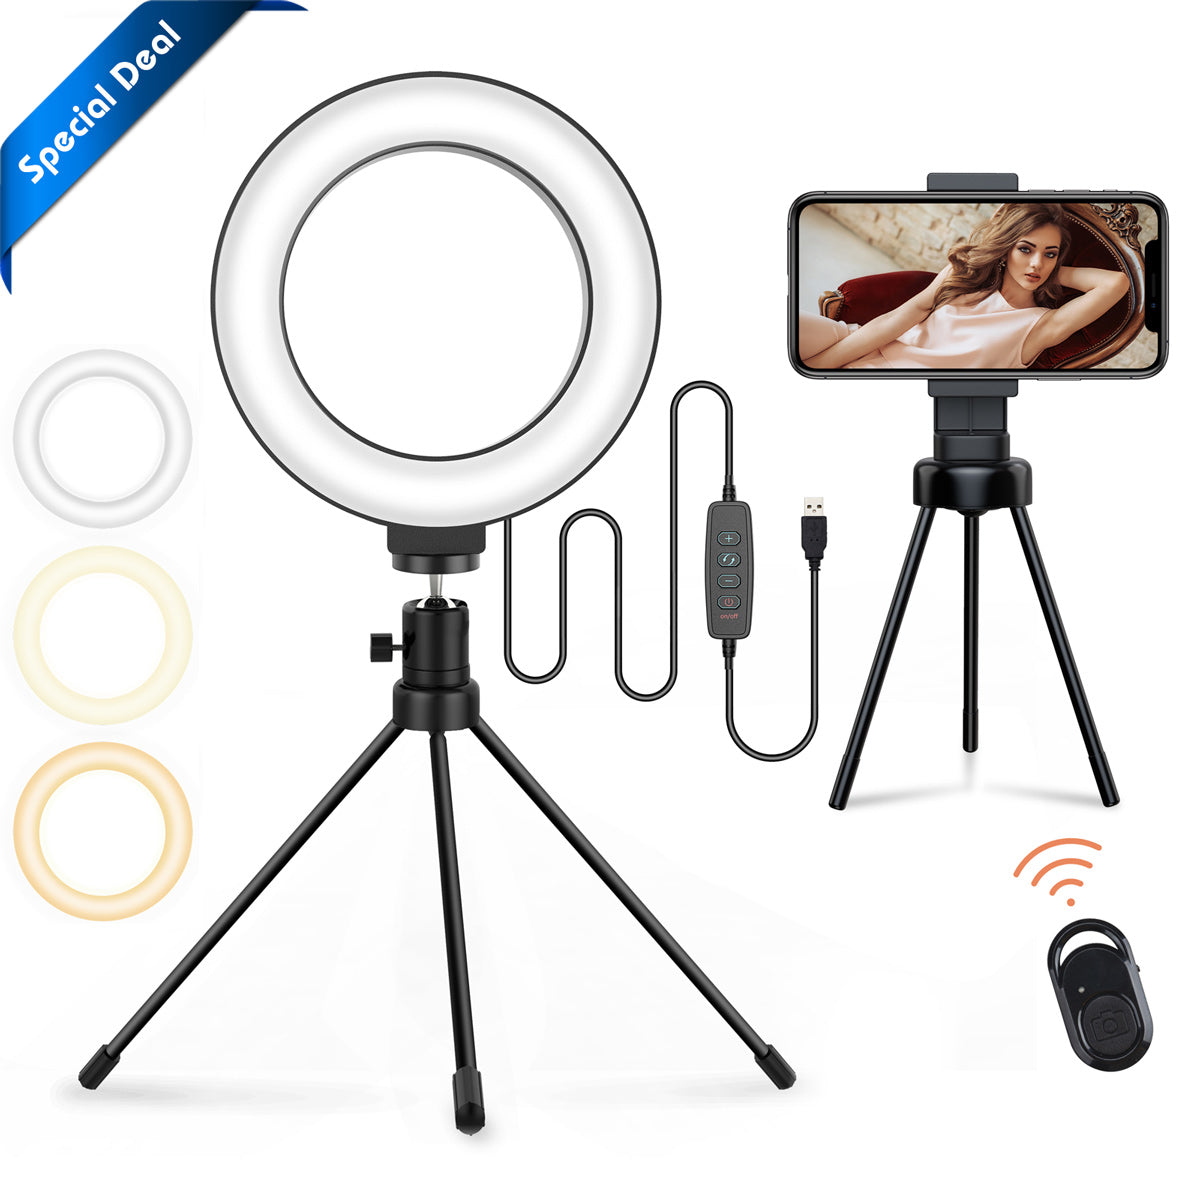 PC46 6” Selfie Ring Light with Stand